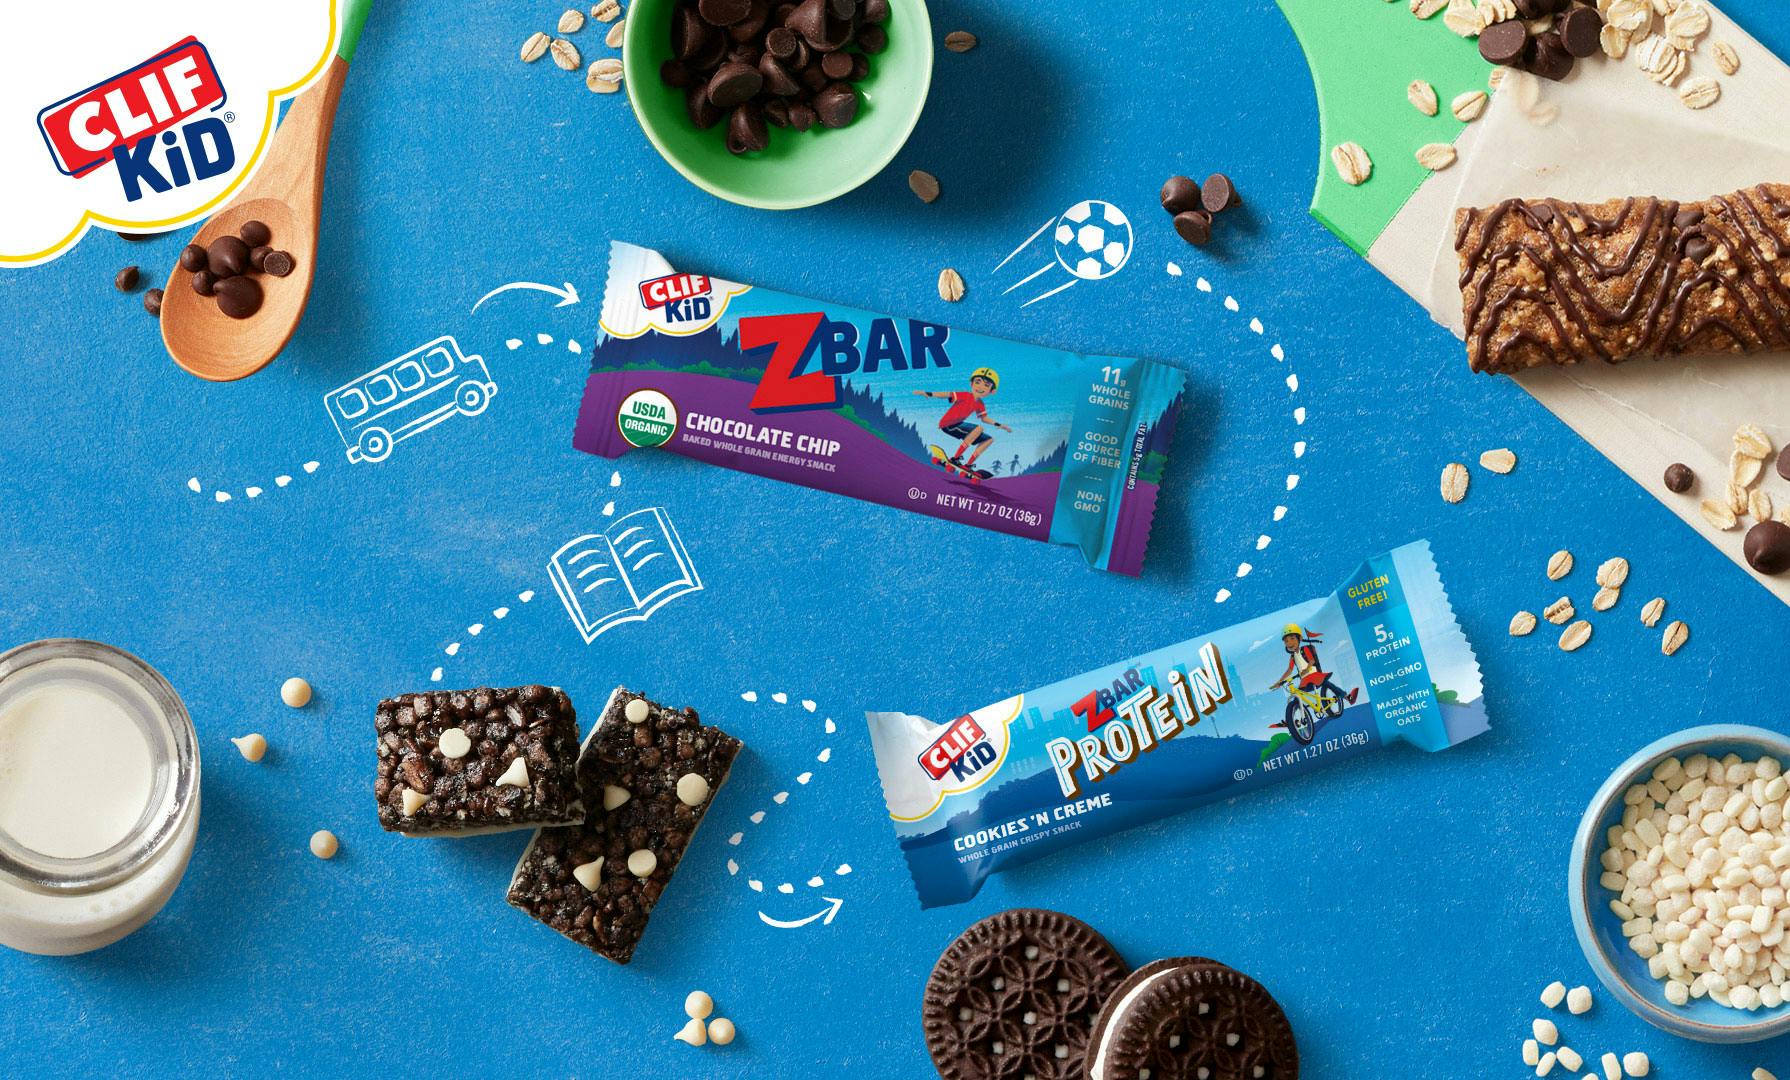 CLIF Kid back to school with zbar